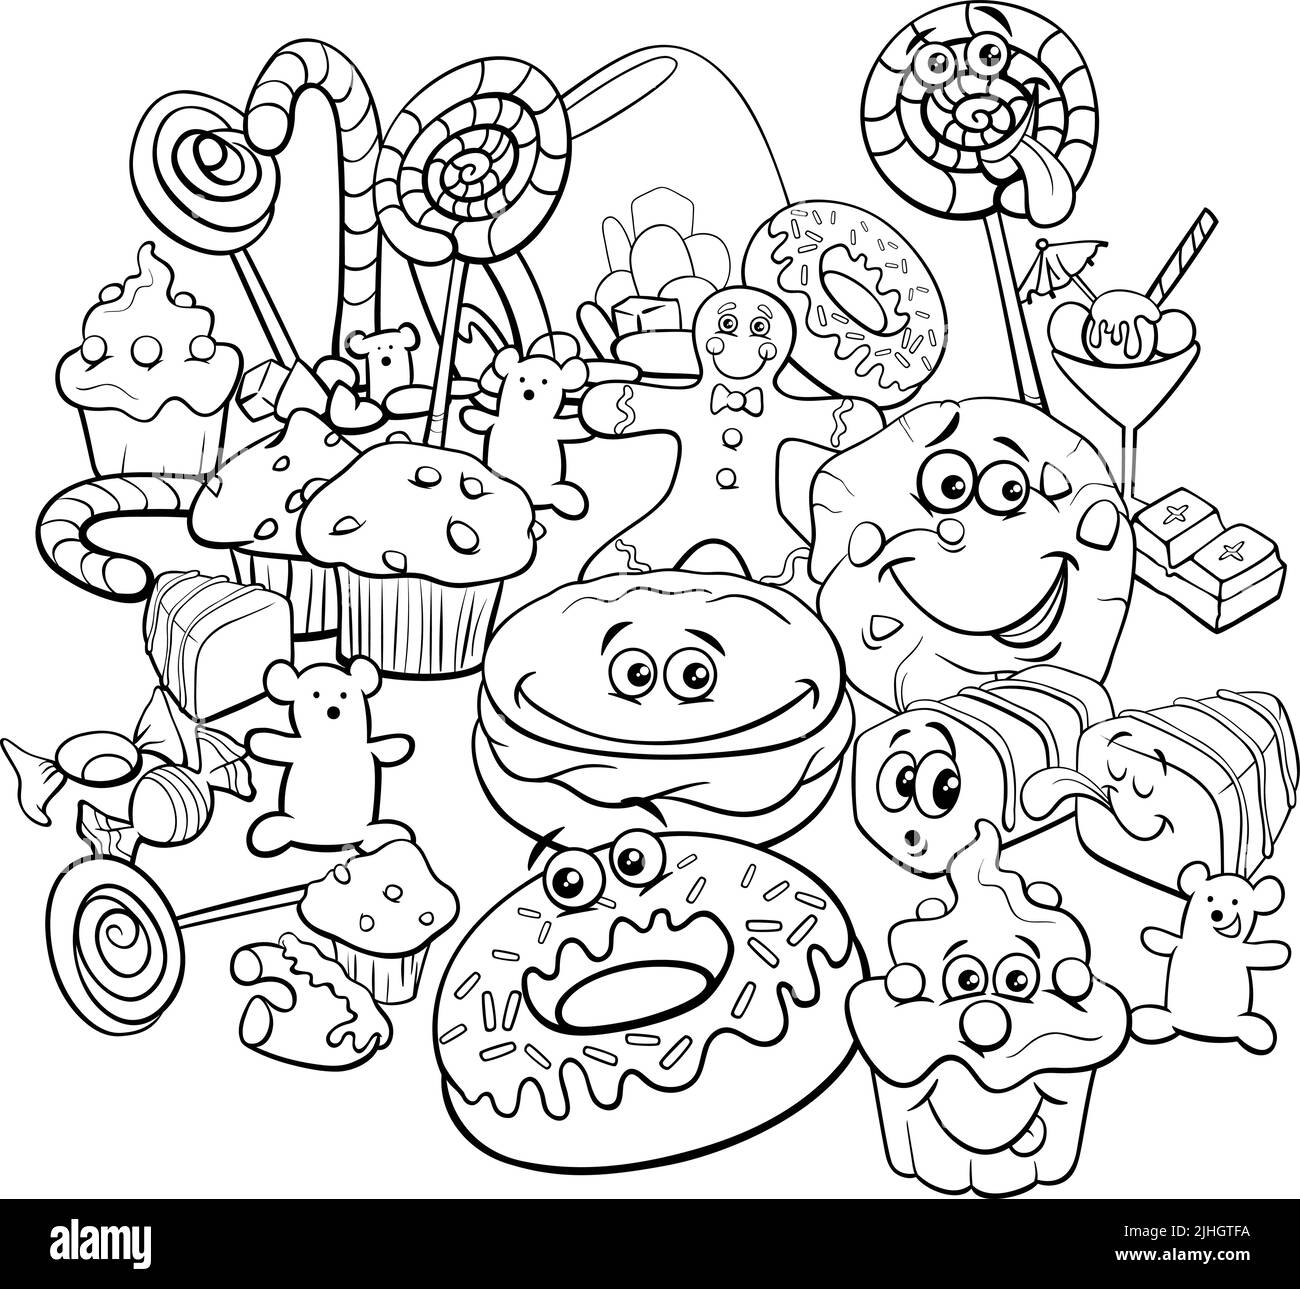 Black and white cartoon illustration of sweet food objets and candy objects group coloring page Stock Vector